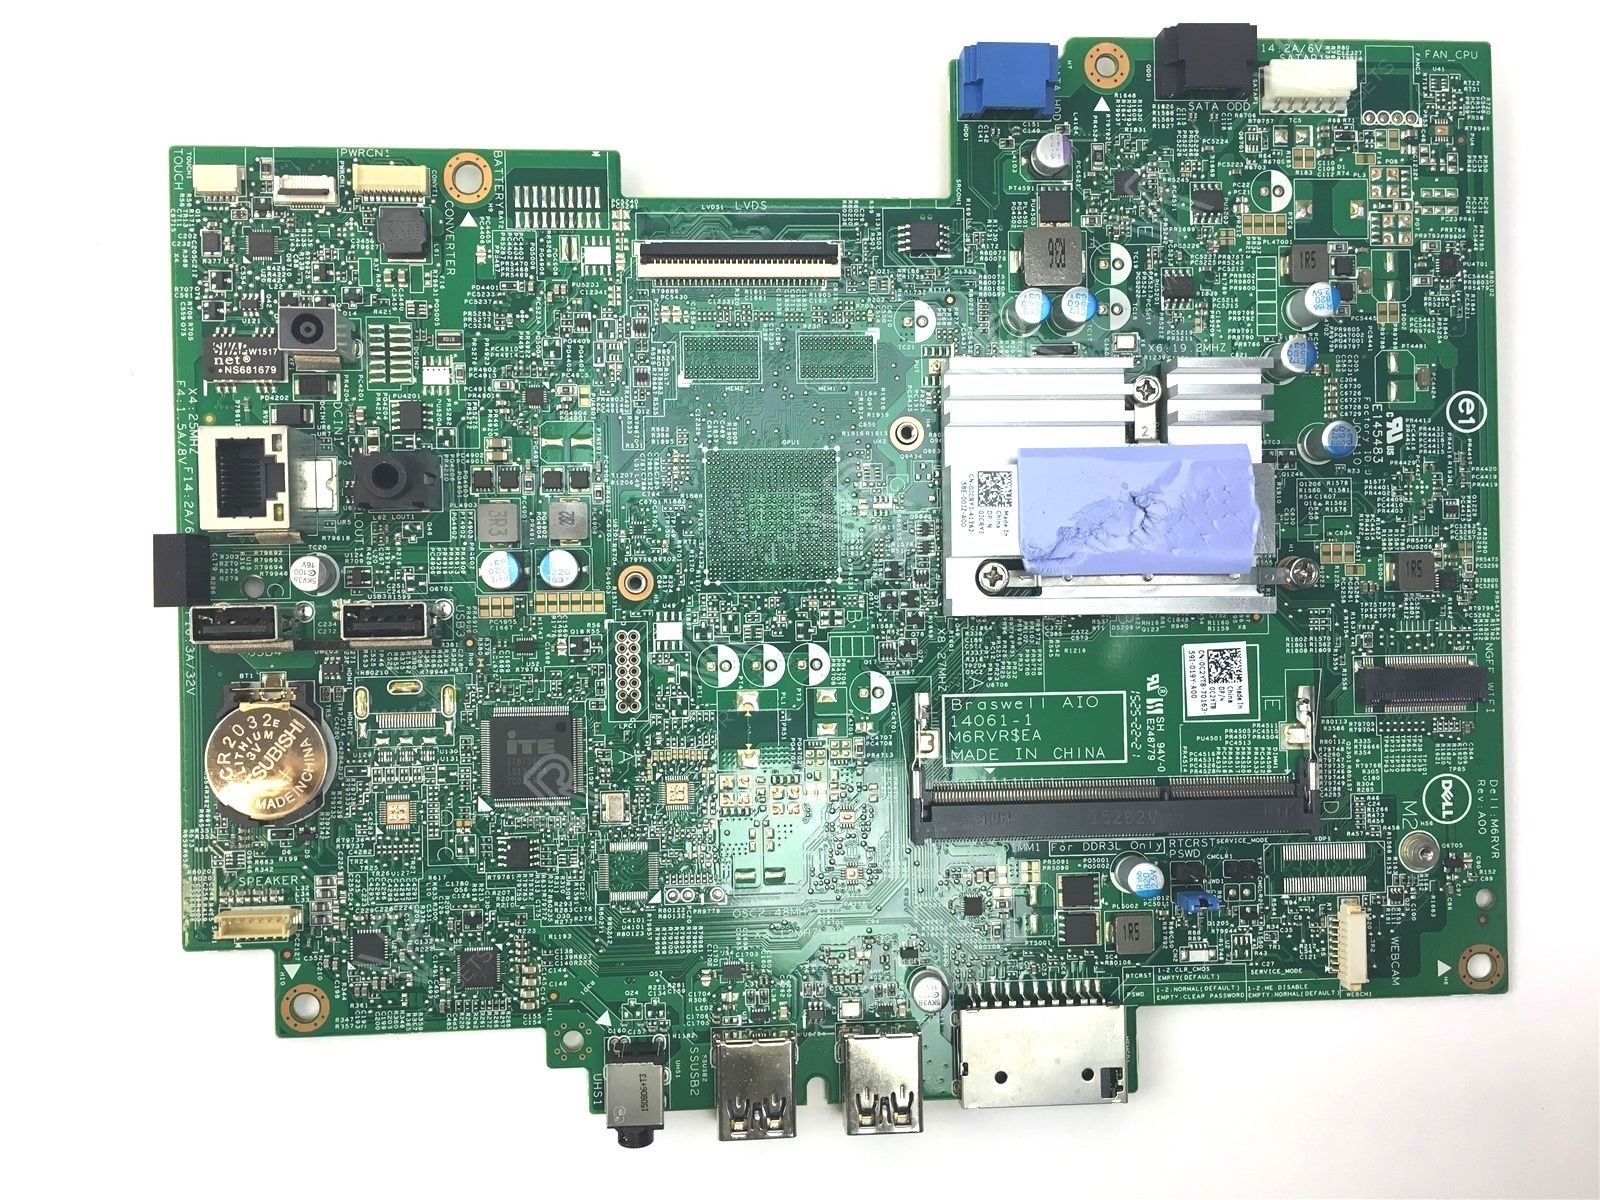 Dell Inspiron 20 3052 AIO Pentium N3700 1.6GHz CPU Motherboard C2YT8 0C2YT8